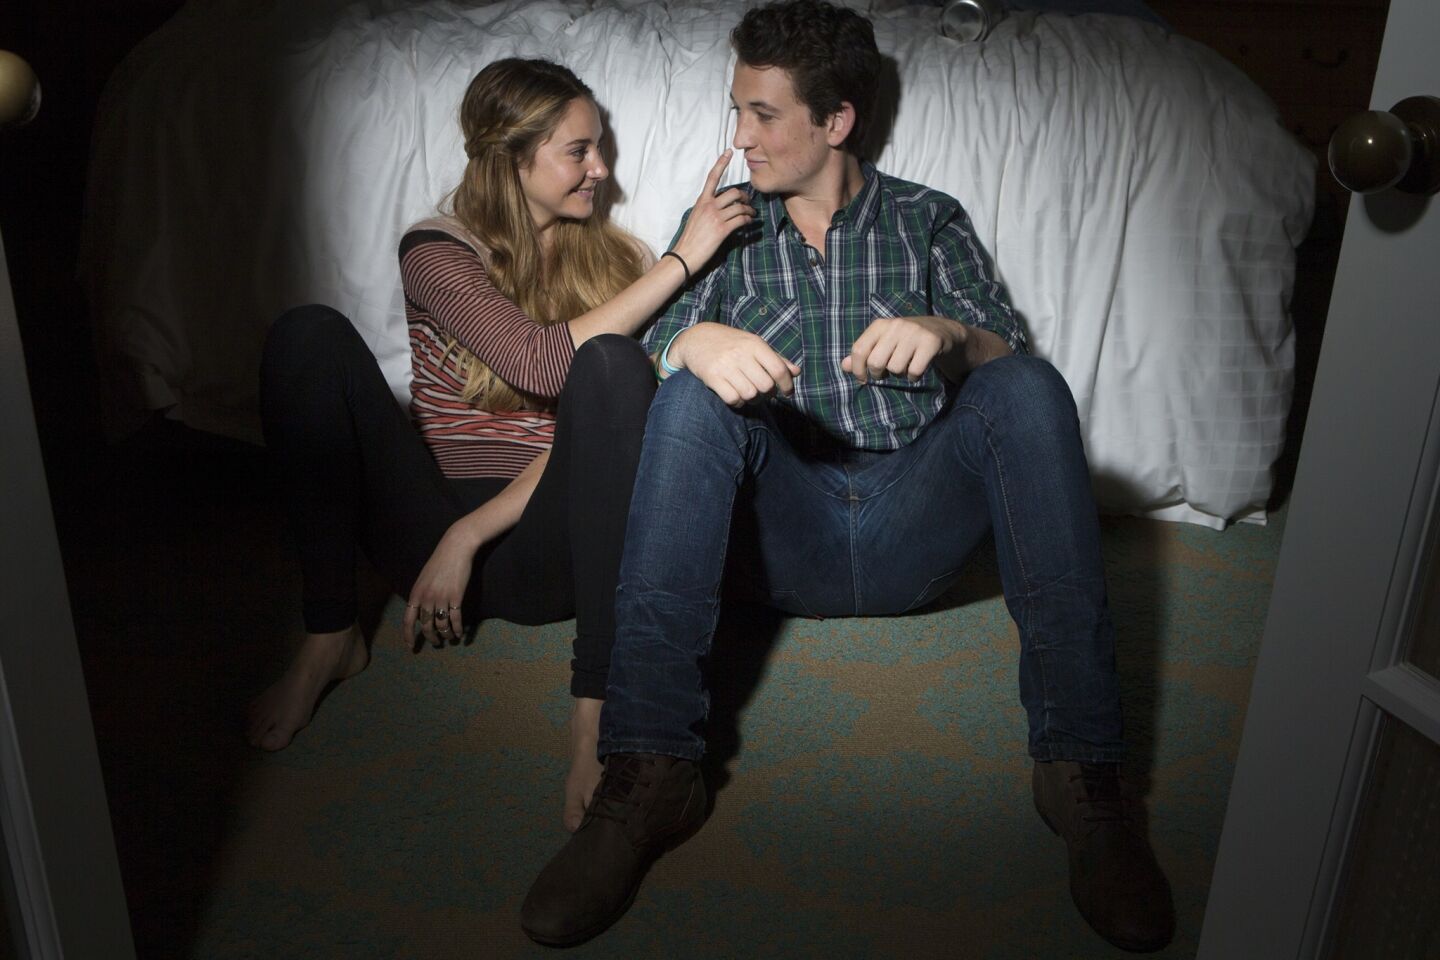 Shailene Woodley and Miles Teller star in "The Spectacular Now."